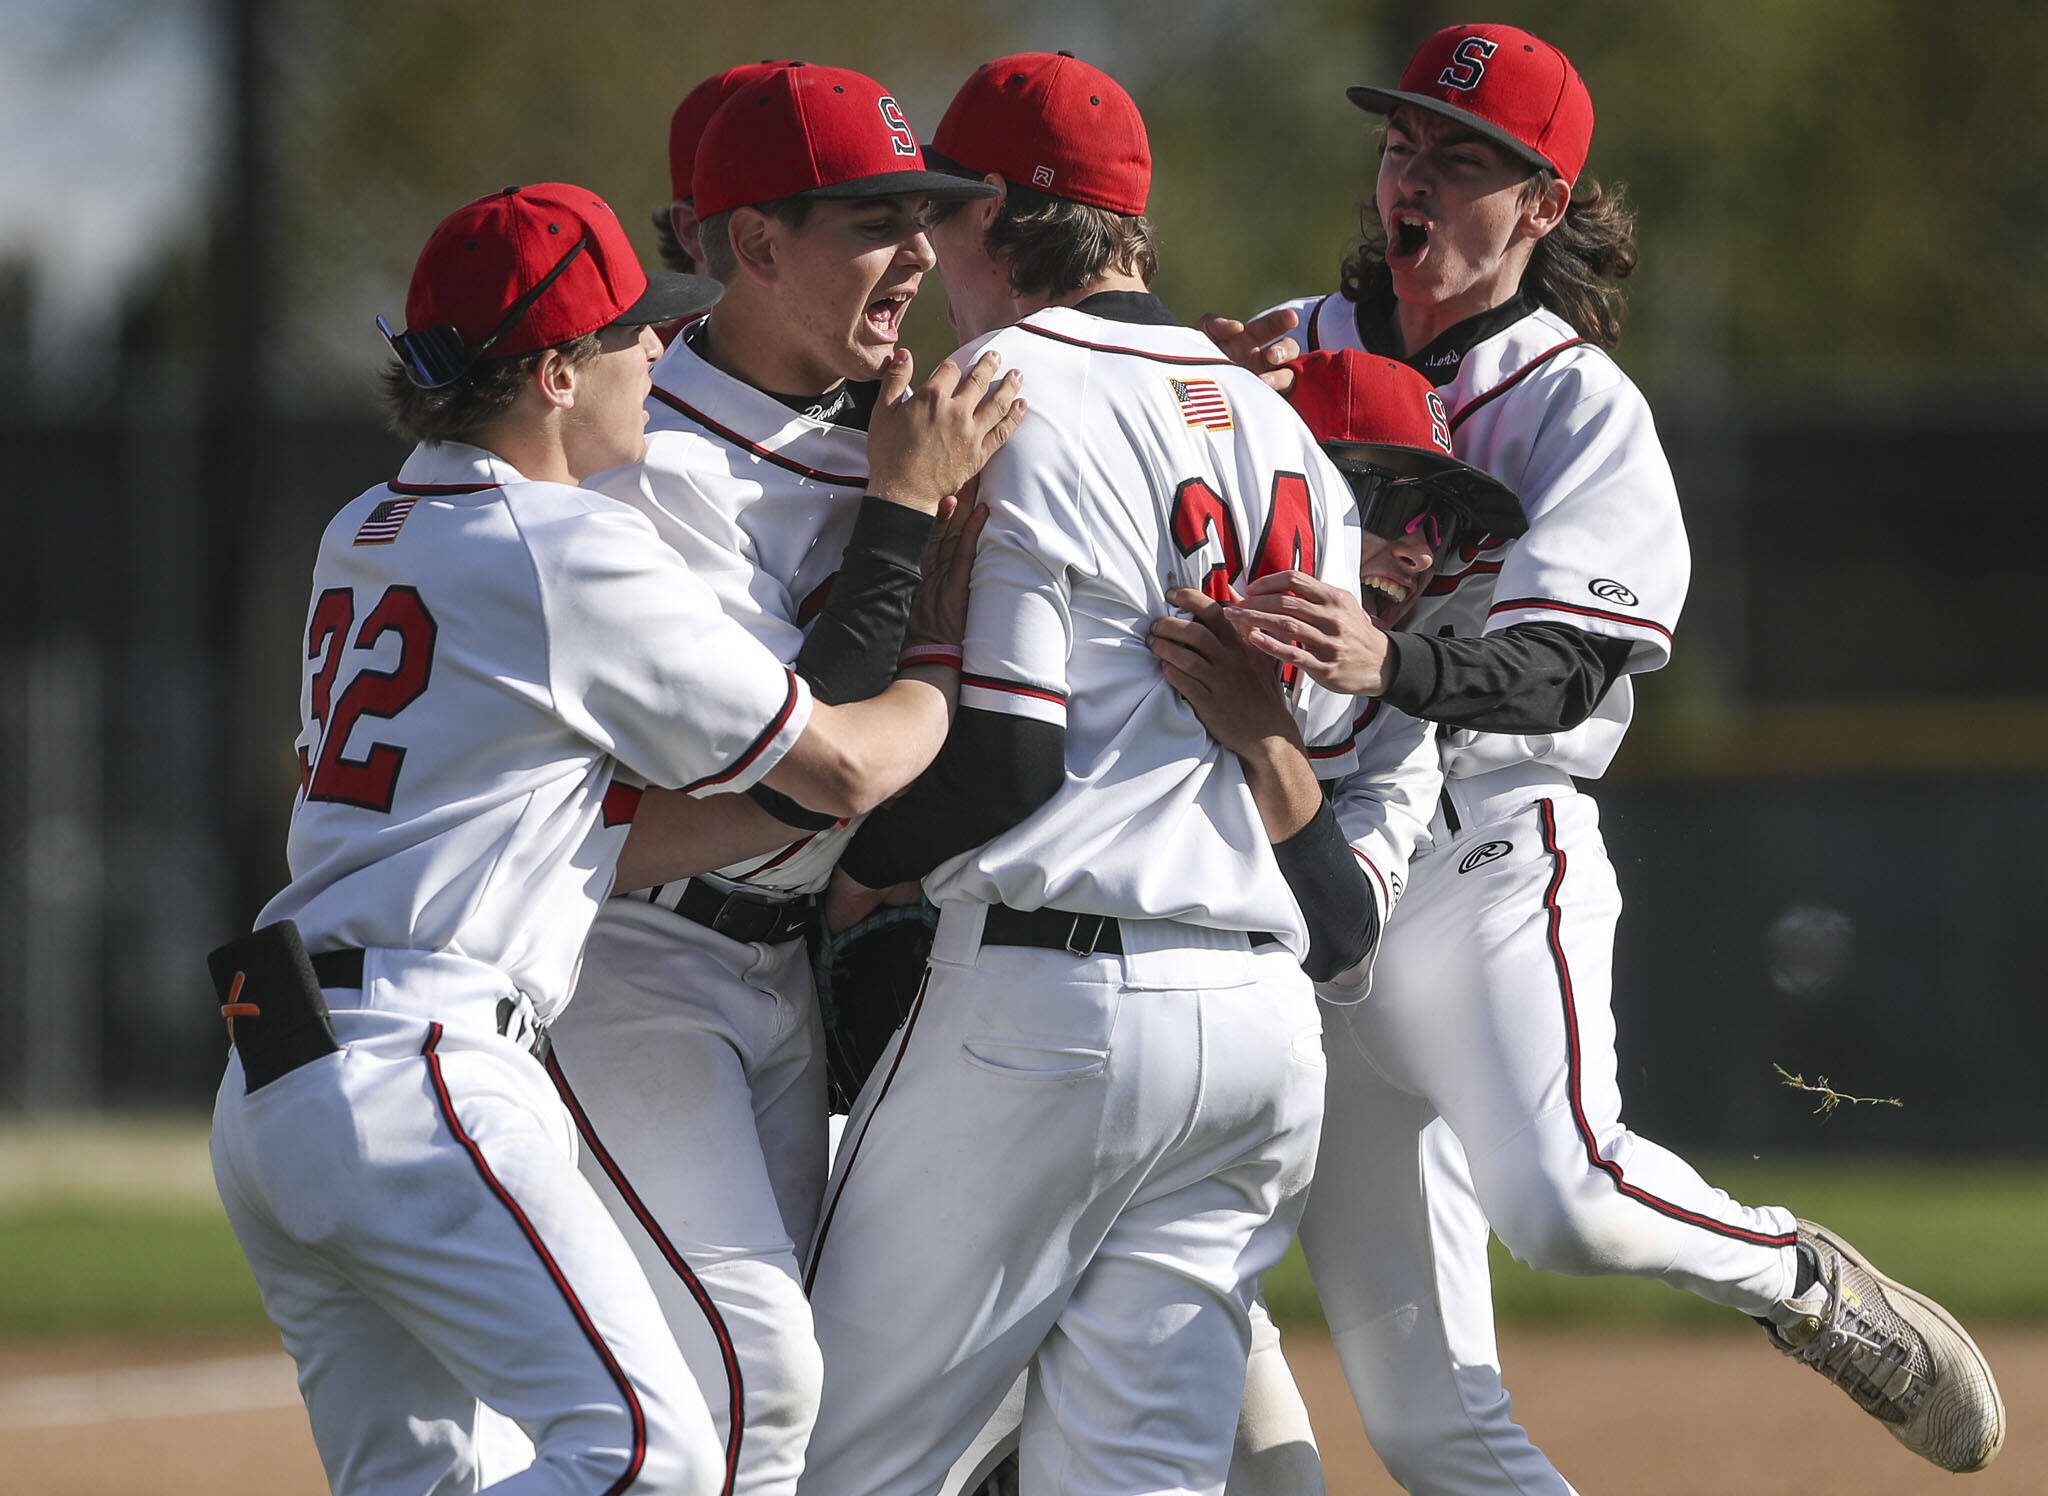 Snohomish players celebrate during a District 1 3A baseball game between Meadowdale and Snohomish at Snohomish High School on Monday, April 30, 2024 in Snohomish, Washington. Snohomish won, 3-1. (Annie Barker / The Herald)